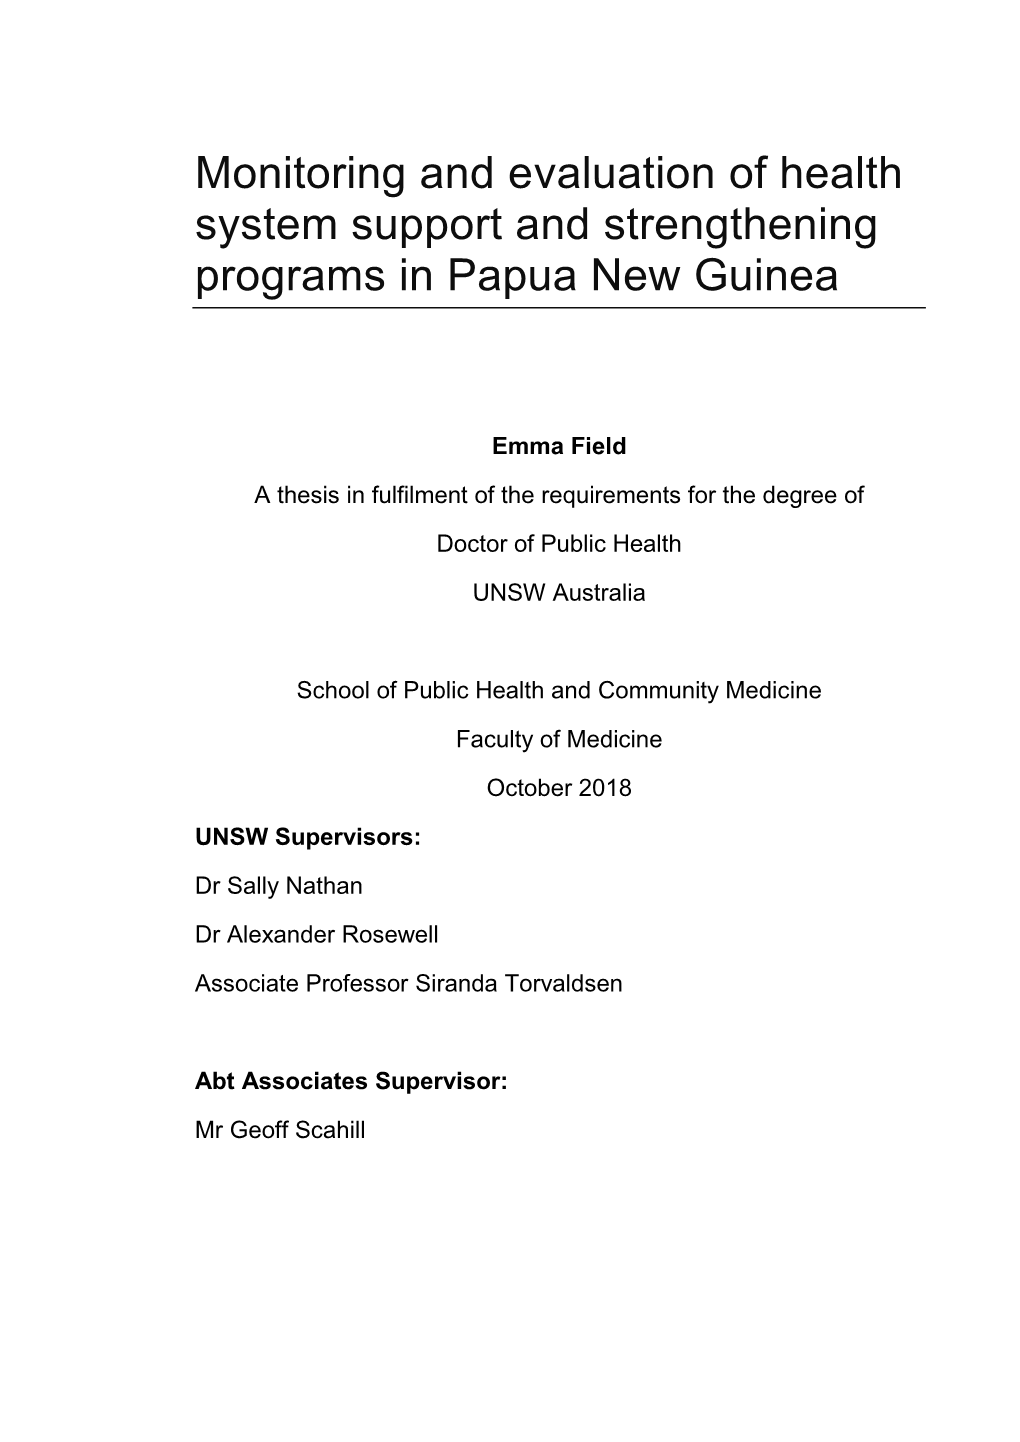 Monitoring and Evaluation of Health System Support and Strengthening Programs in Papua New Guinea